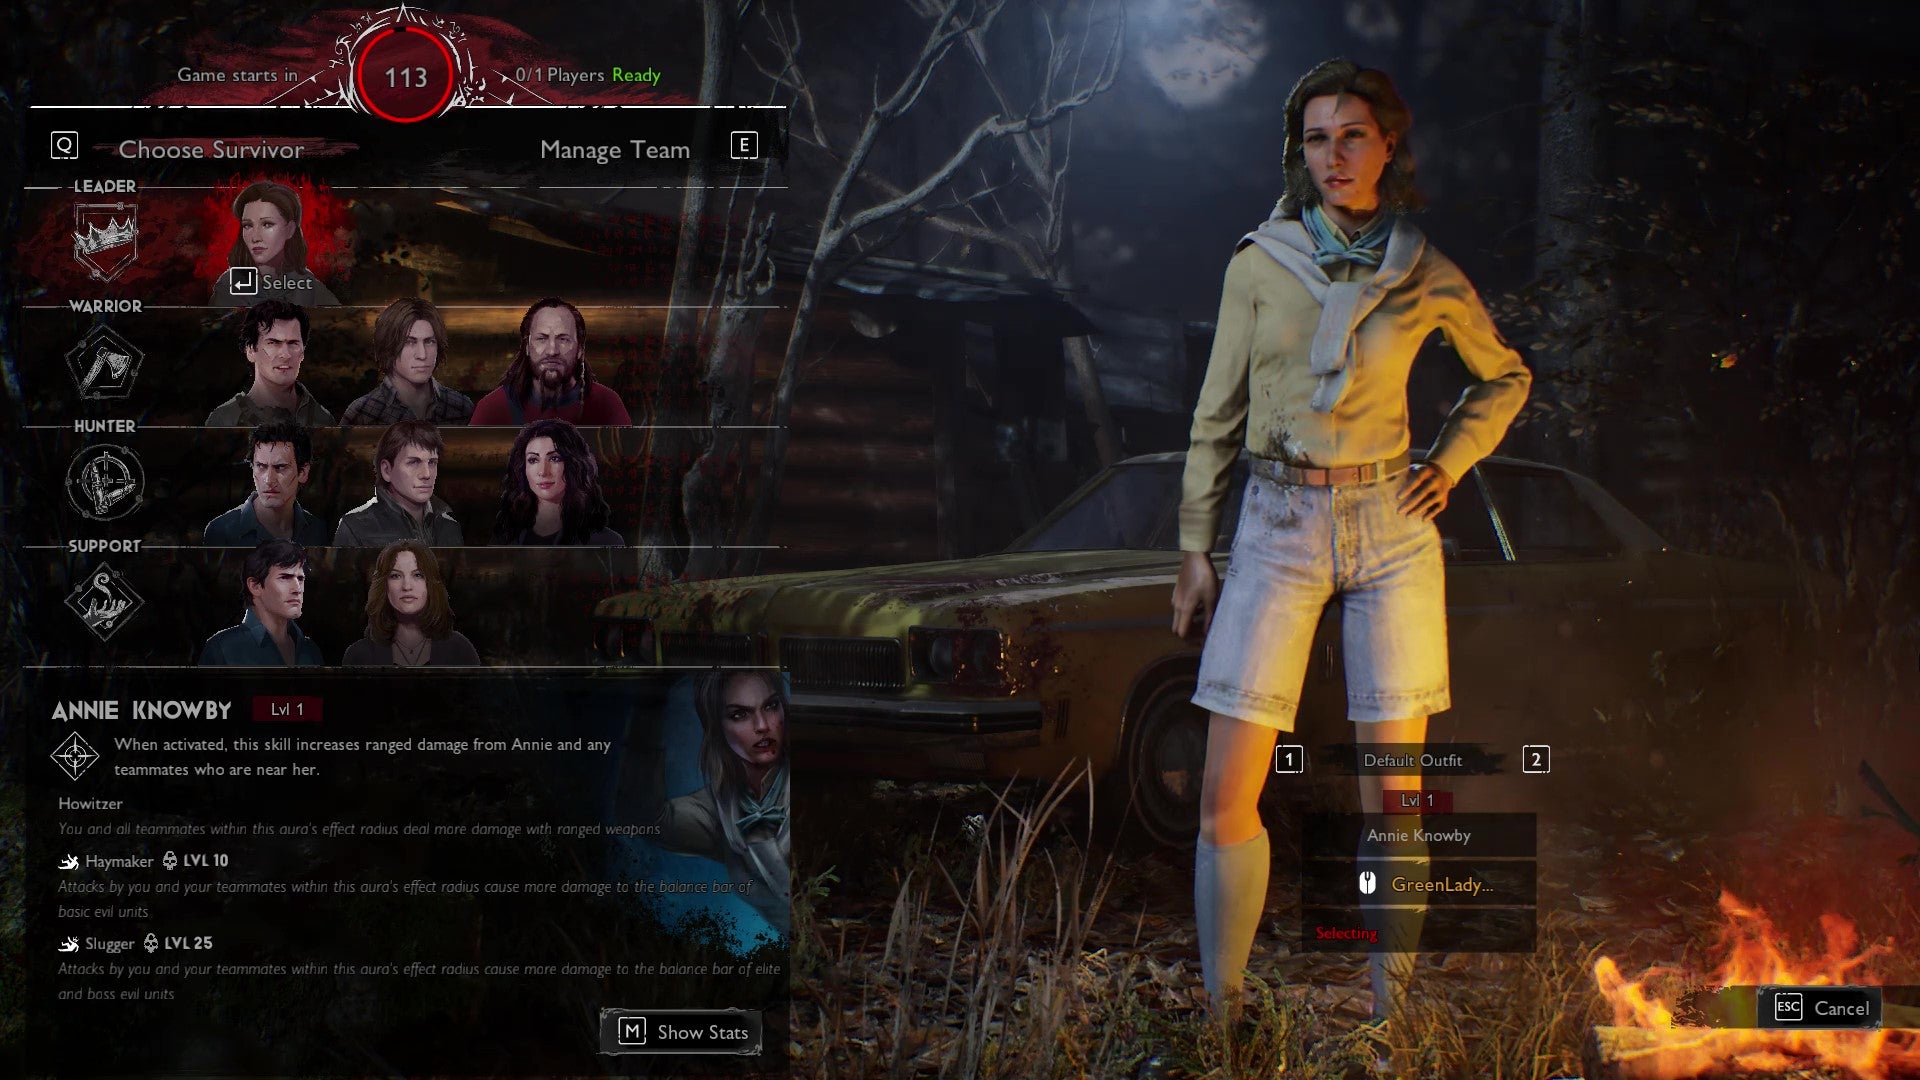 The player selection screen from Evil Dead: The Game, with Annie Knowby selected by a Survivor player.